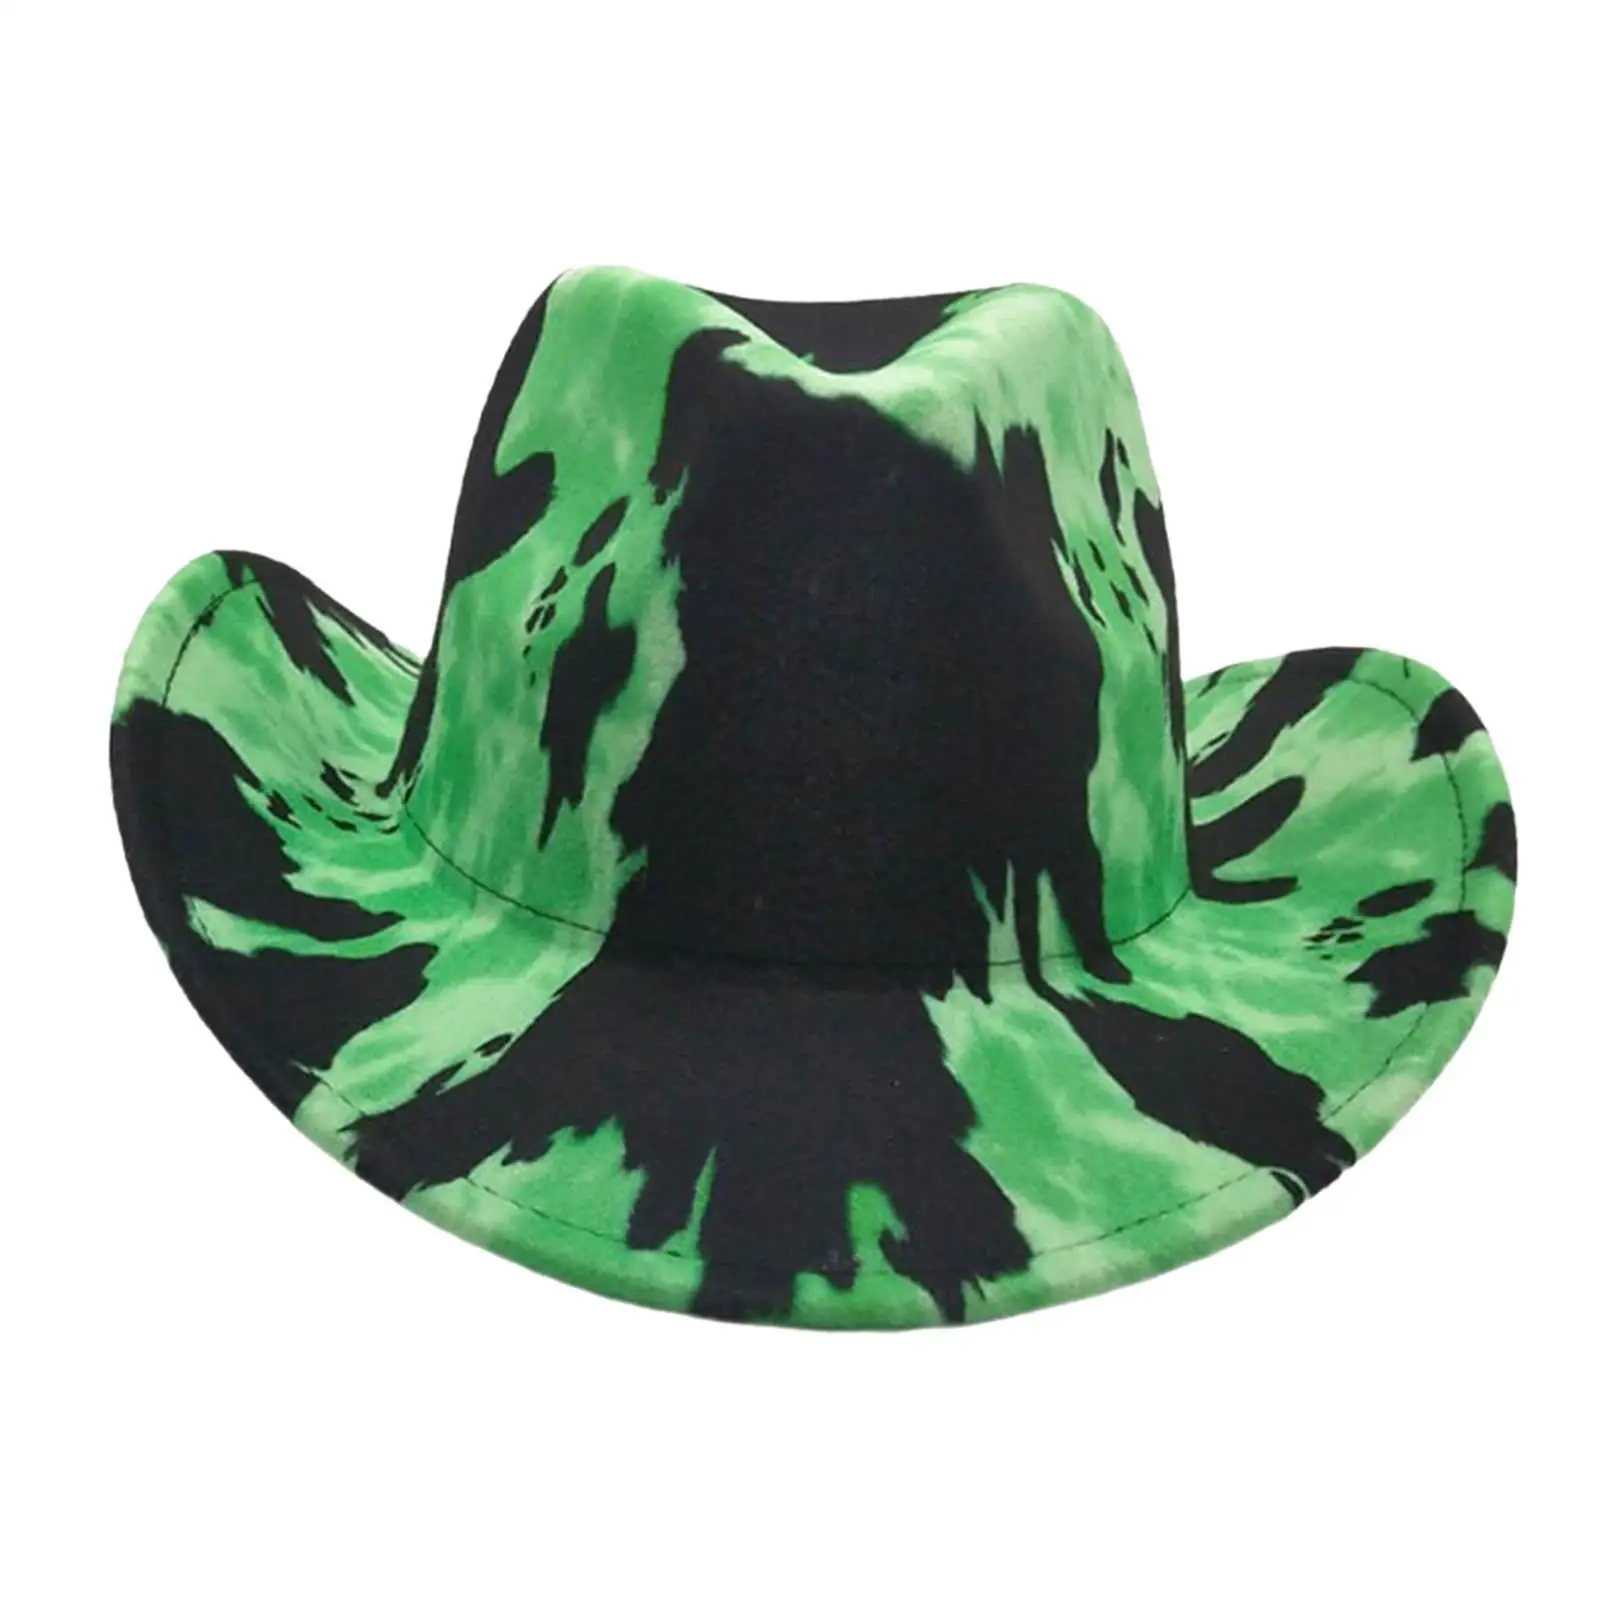 Cowboy Hat Cow Print Unisex Hat Stylsih Womens Hats with Brim Cowgirl Hat Women Hats for Halloween Party Festival